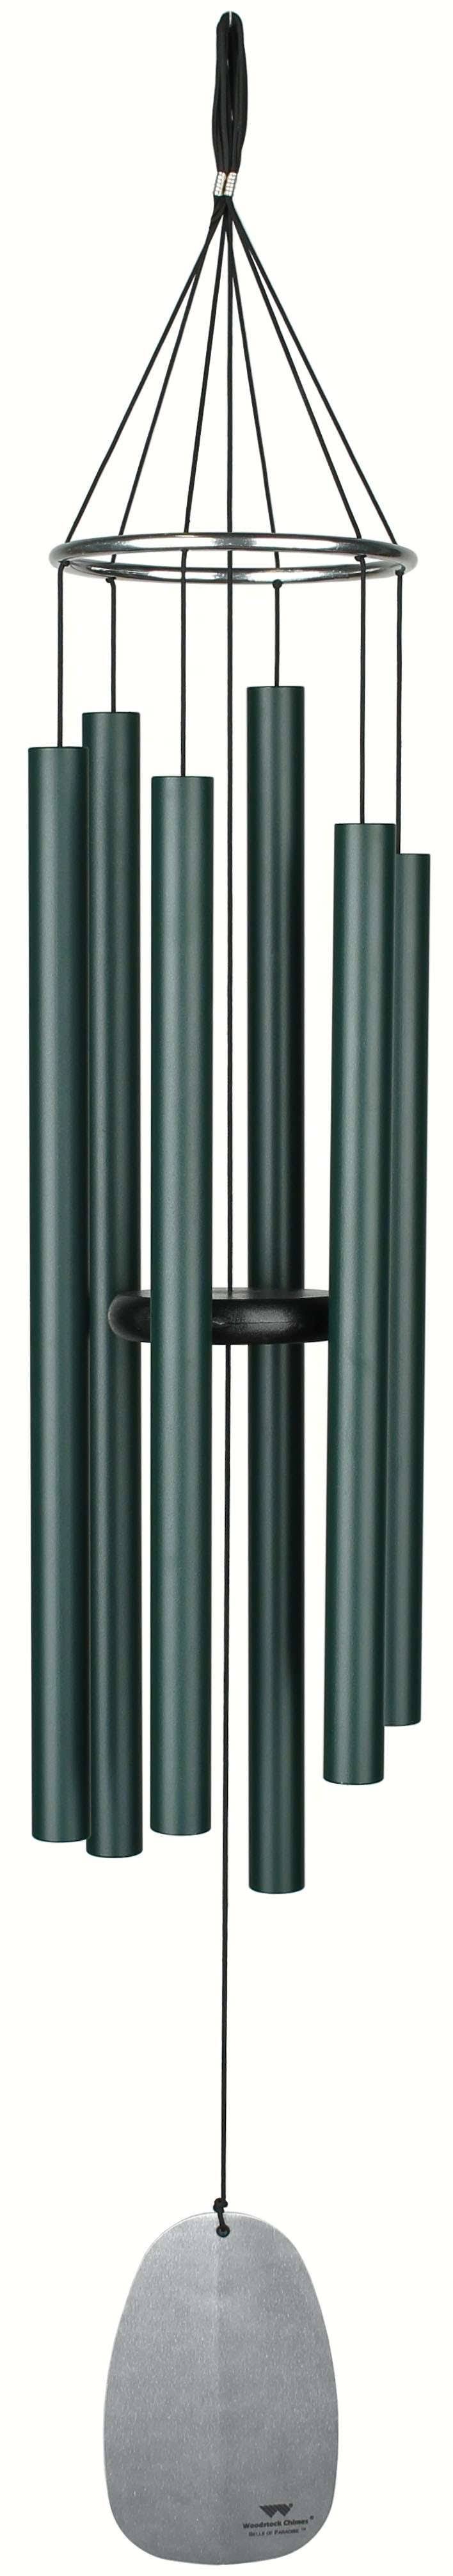 Woodstock Chimes Signature Bells of Paradise Chime - Rainforest Green, Large